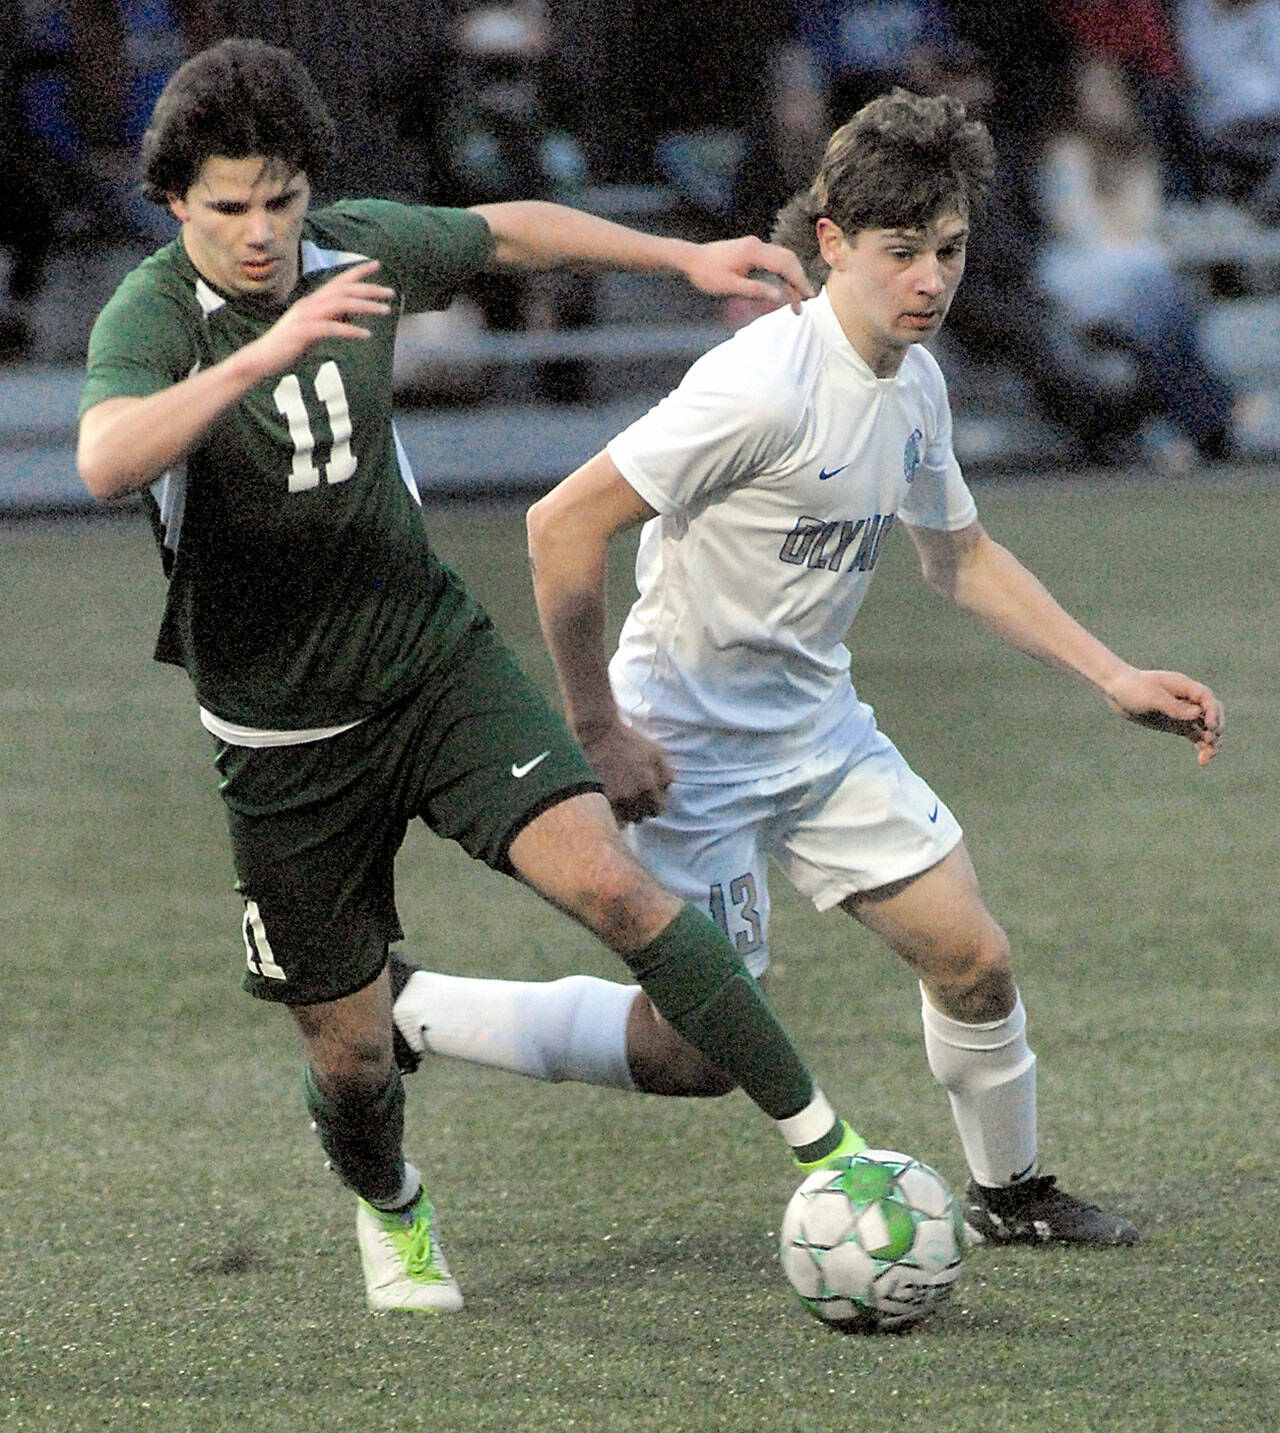 Keith Thorpe/Peninsula Daily News Port Angeles’ Xander Maestas, left, dribbles past Olympic’s Justin Thorsen on Thursday evening at Peninsula College in Port Angeles.